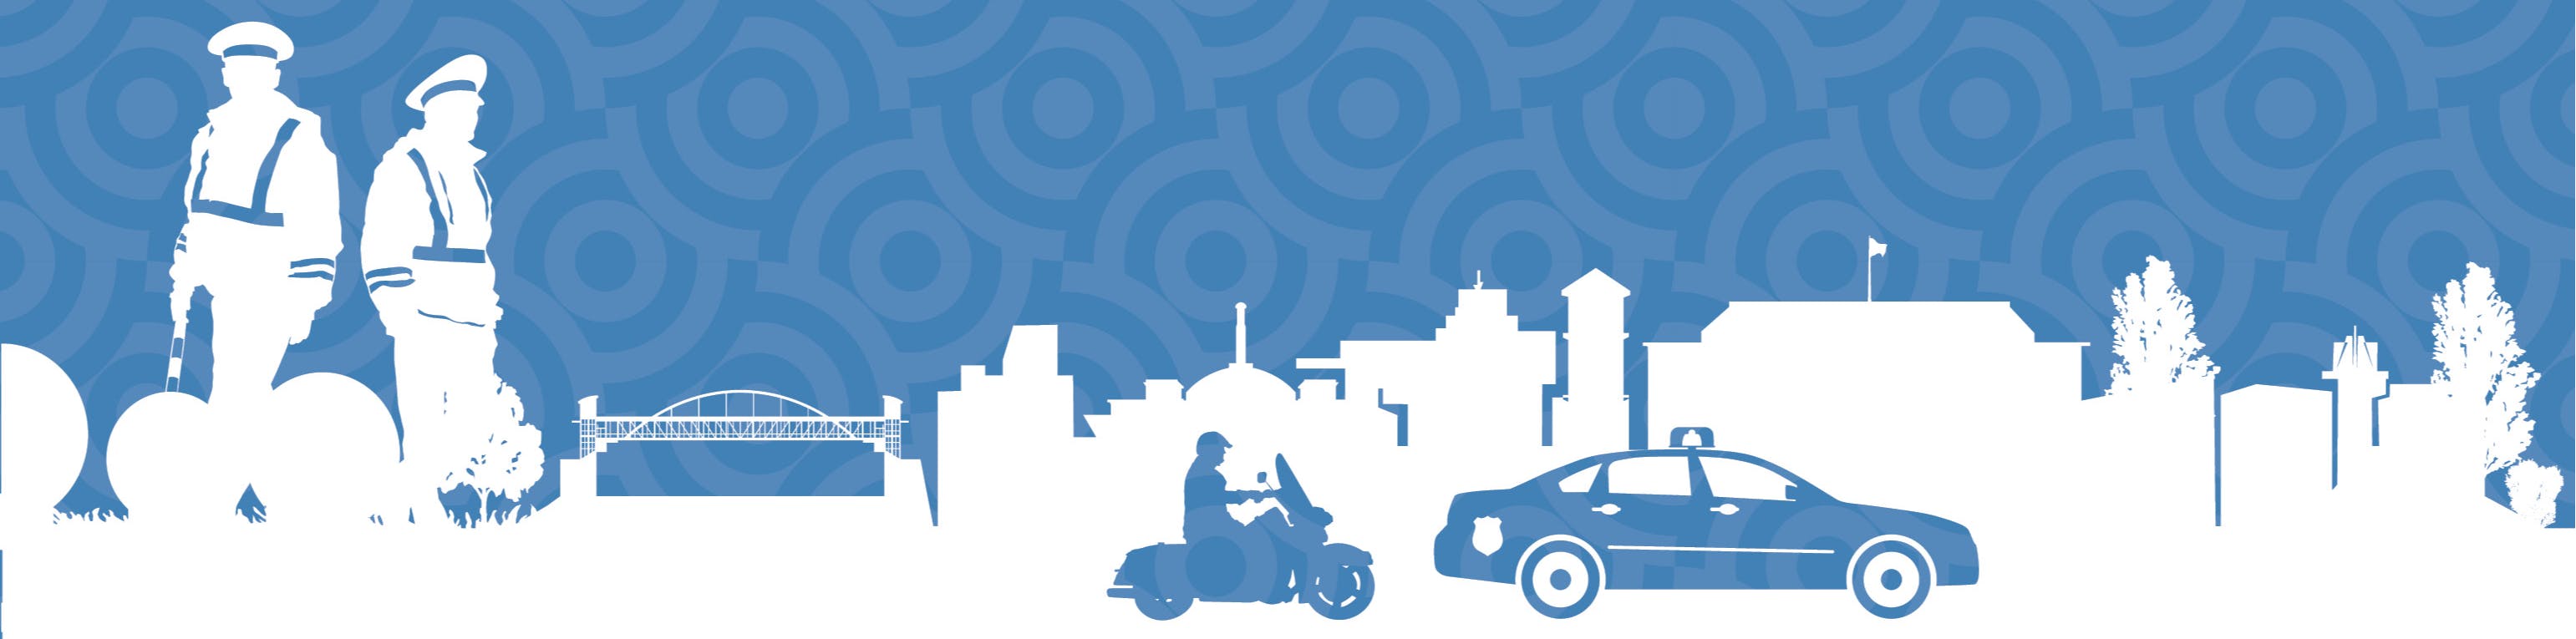 Silhouetted outline of city of Aurora landmarks, police officers and police vehicles